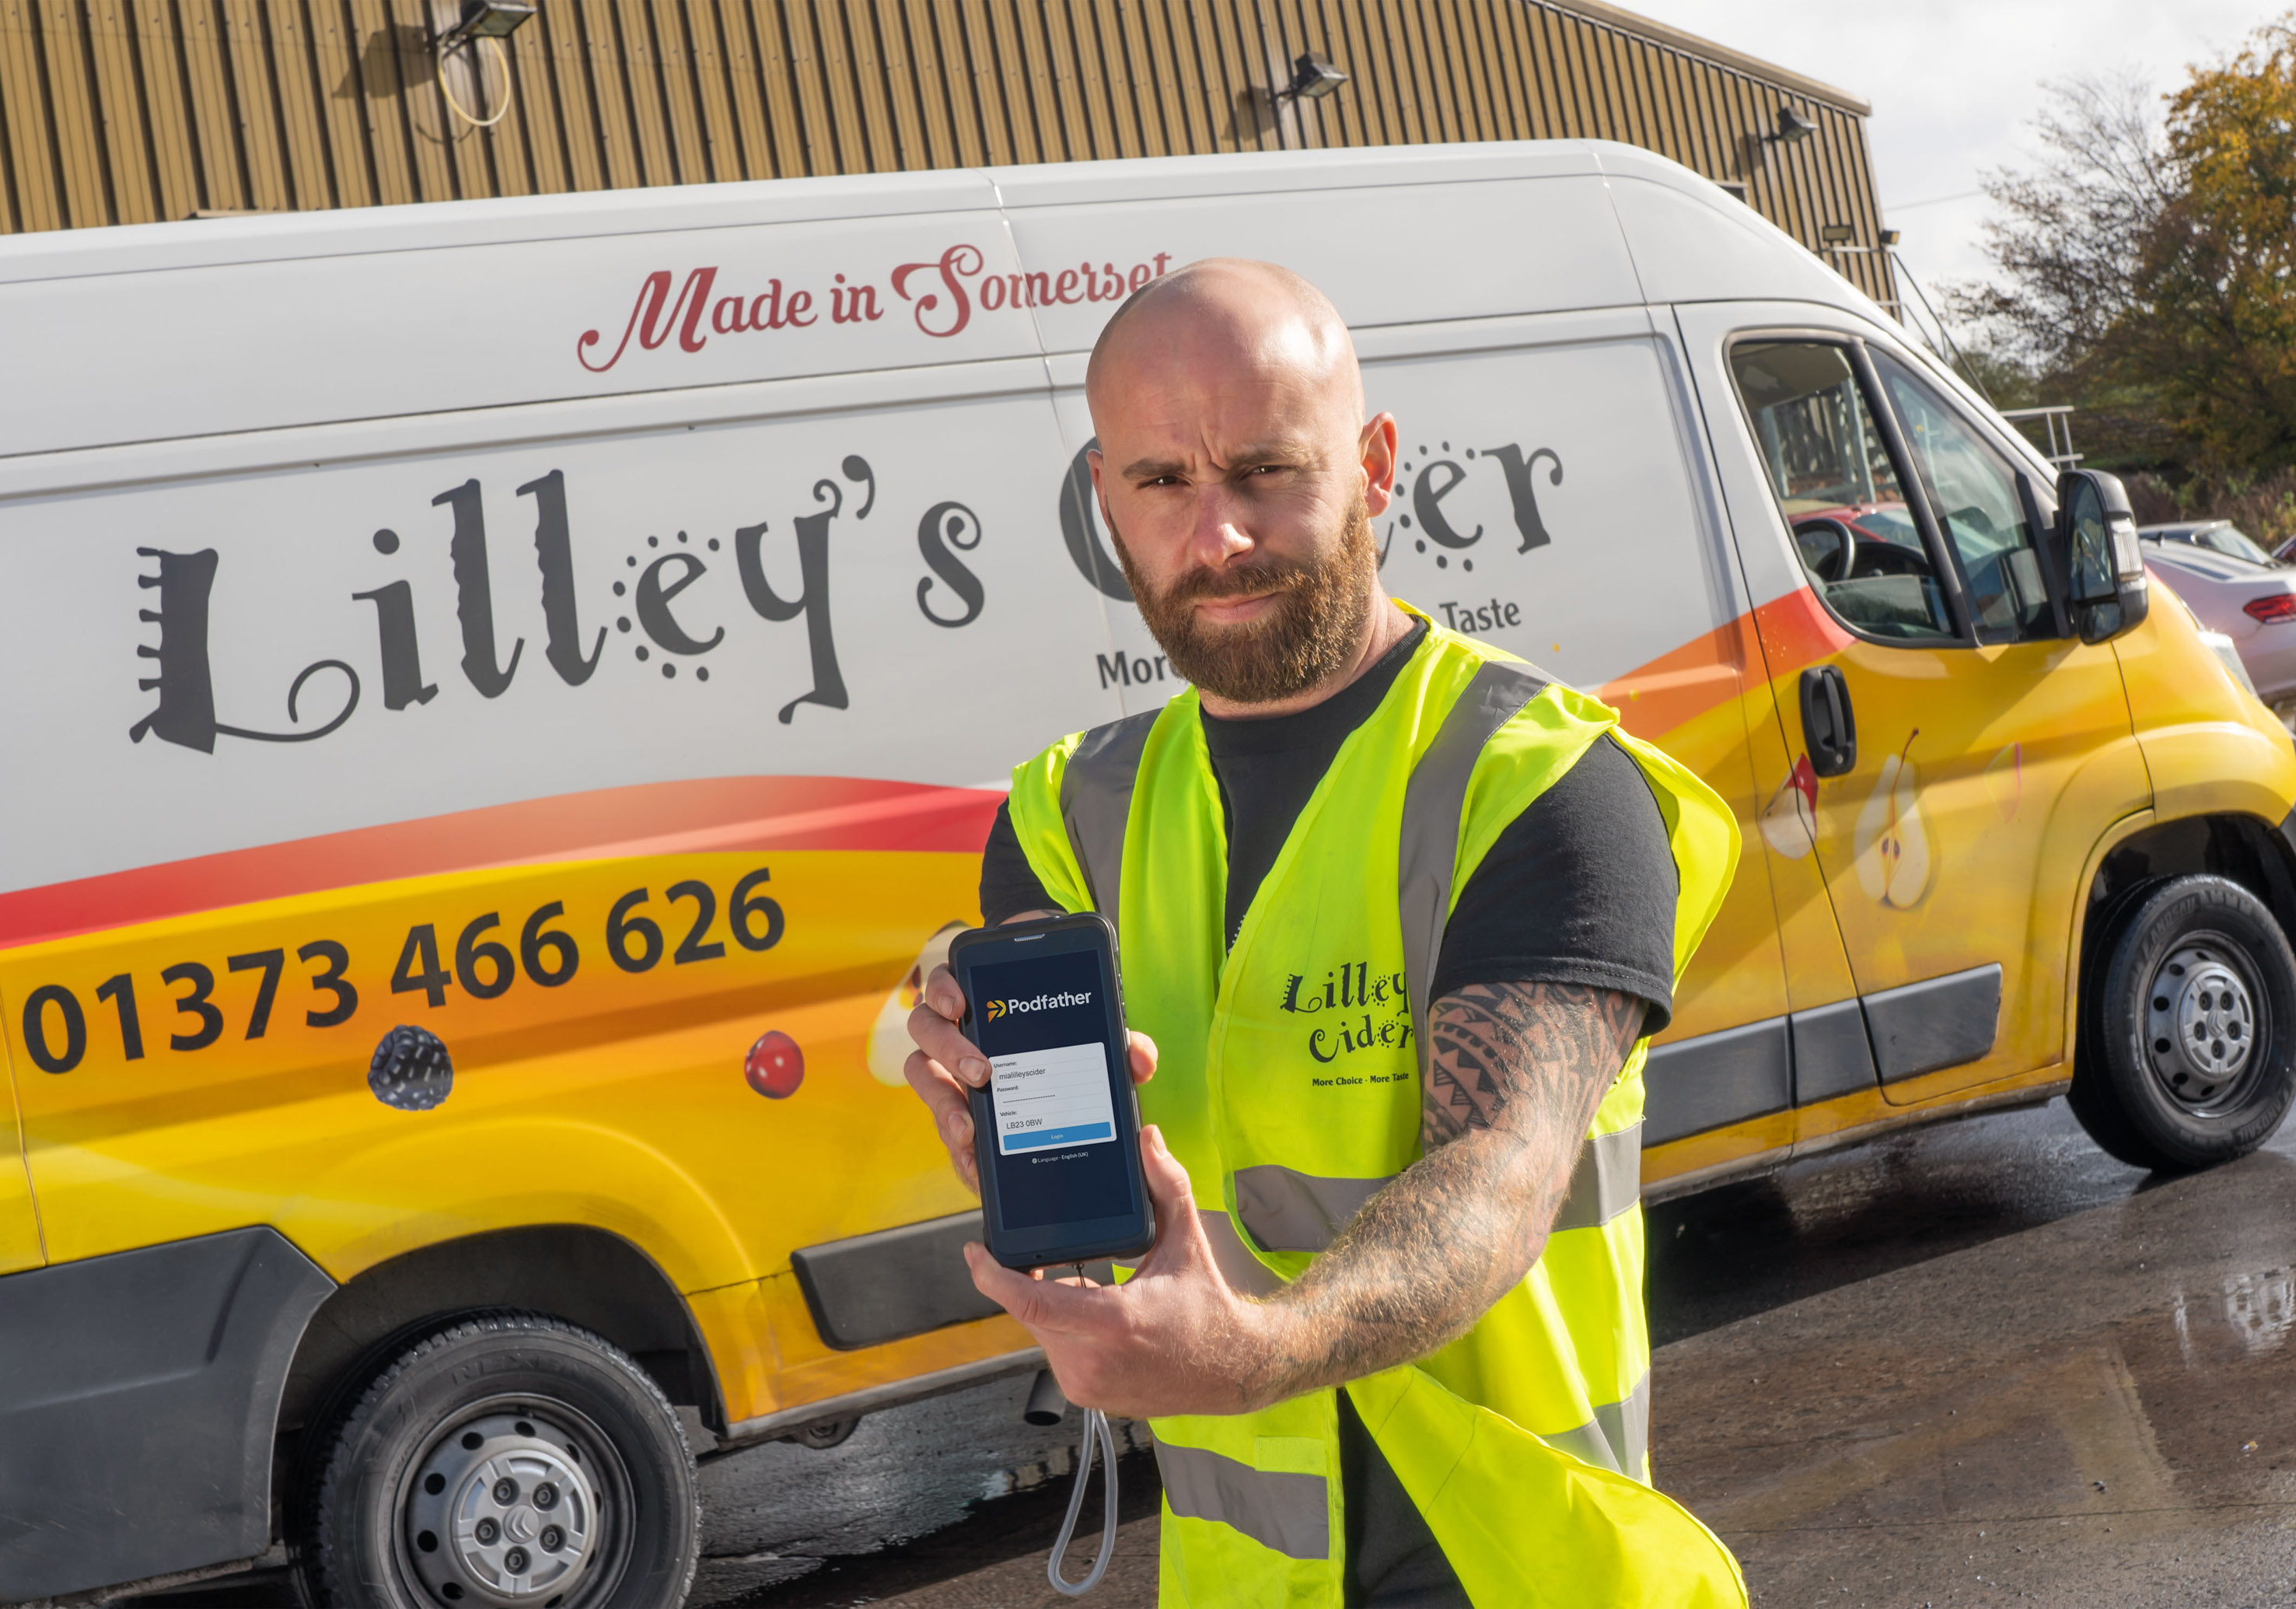 Lilley's Cider employee with Podfather app